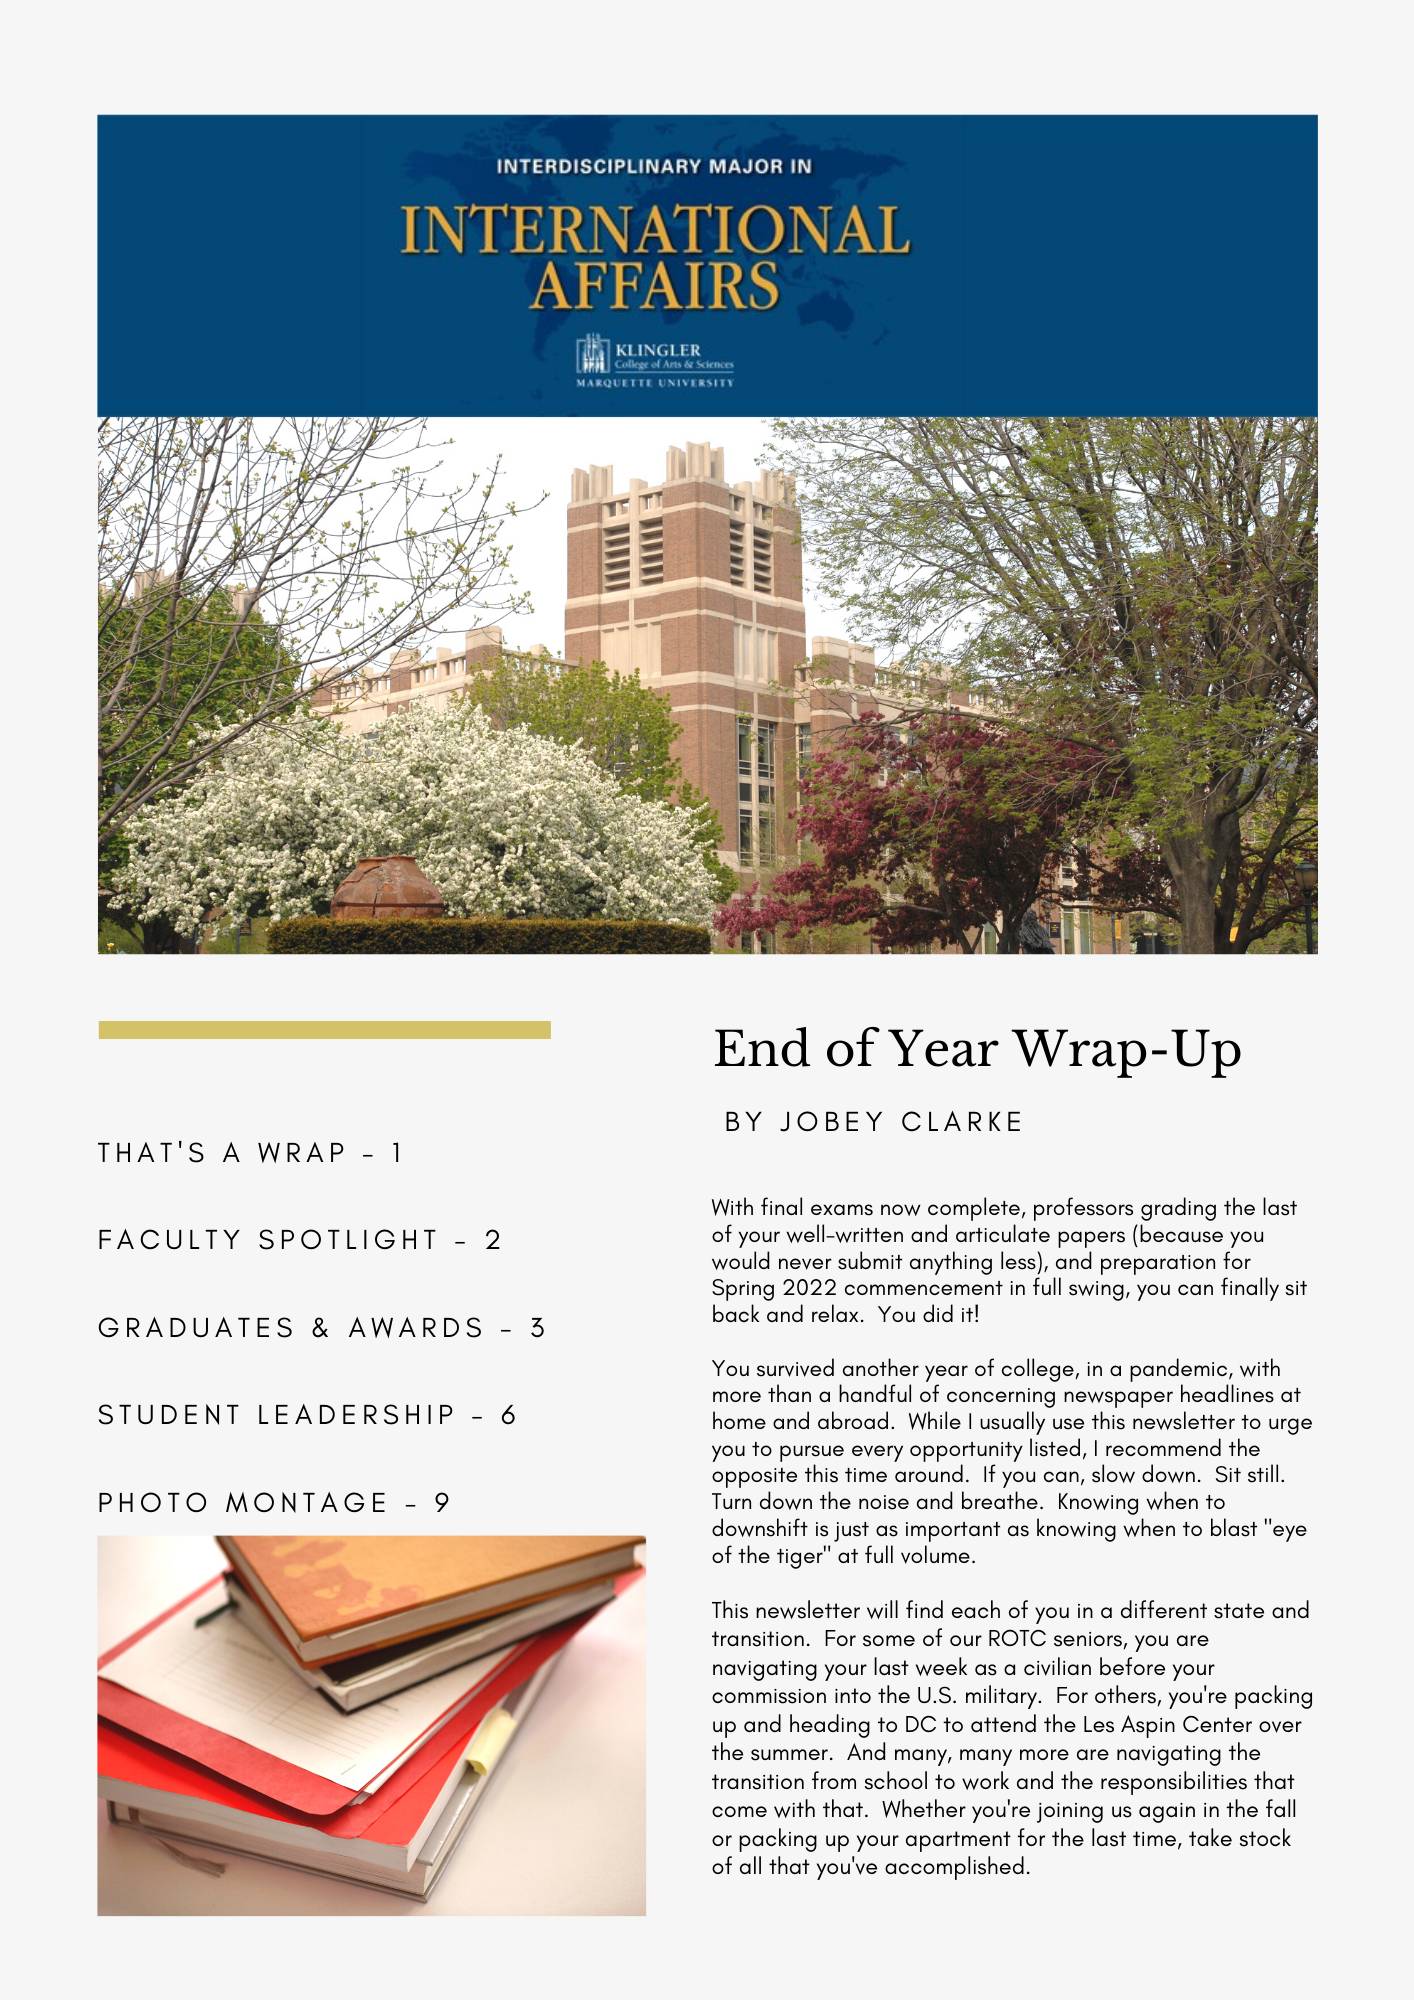 Cover page of INIA Newsletter; displaying blue and gold INIA logo, an article and a photograph of the Marquette campus in spring.